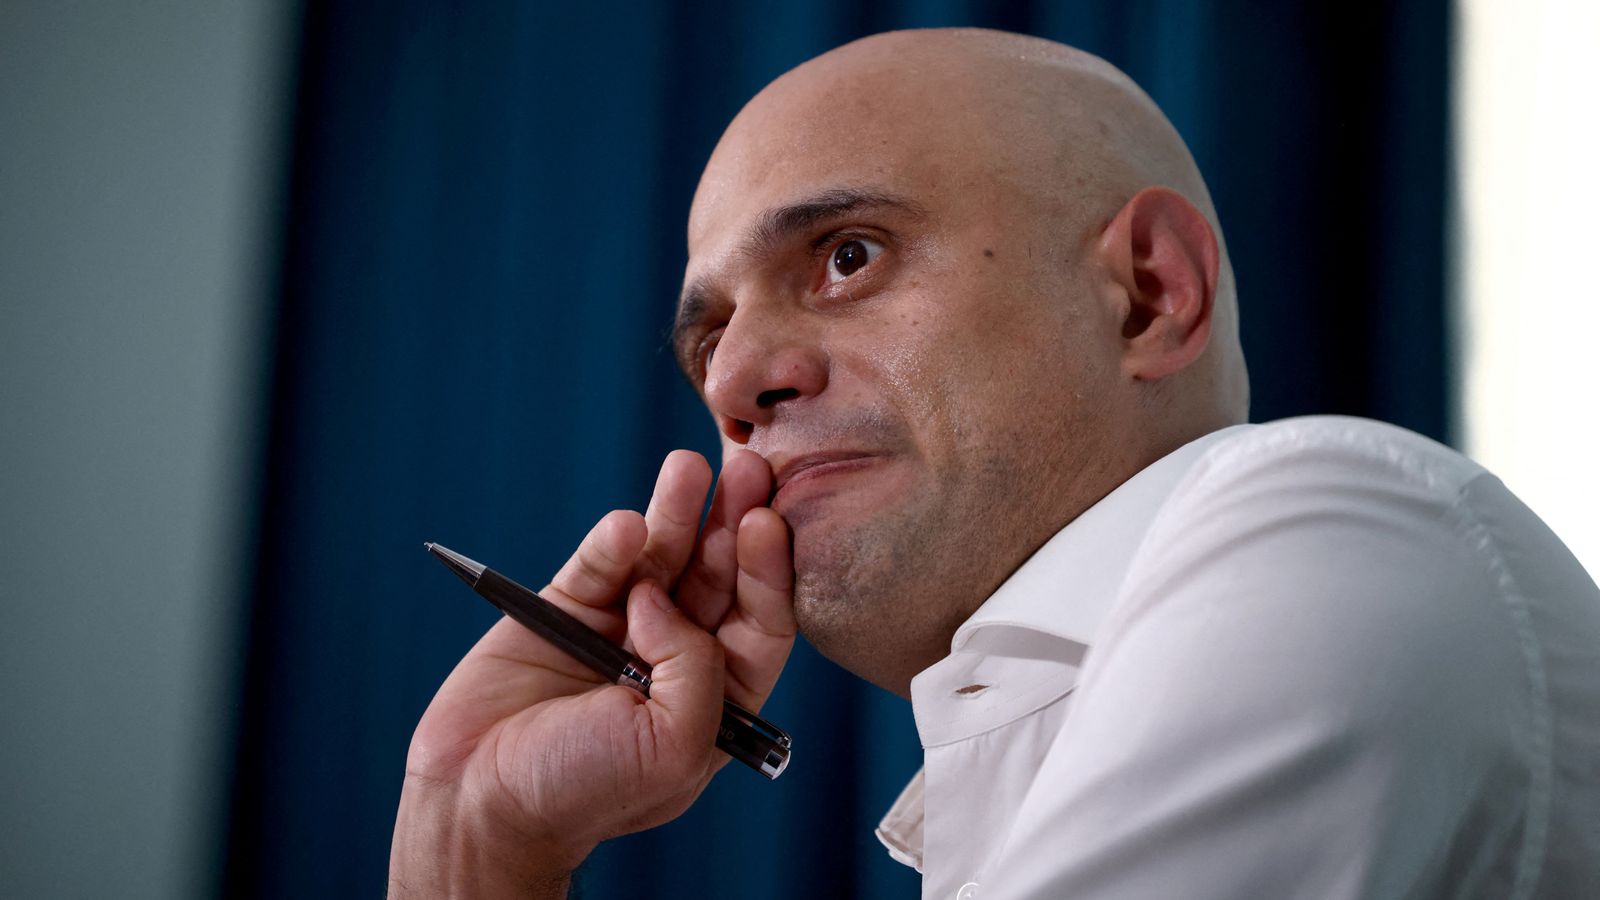 Patients should be charged for GP appointments and A&E visits to ease waits, Sajid Javid says